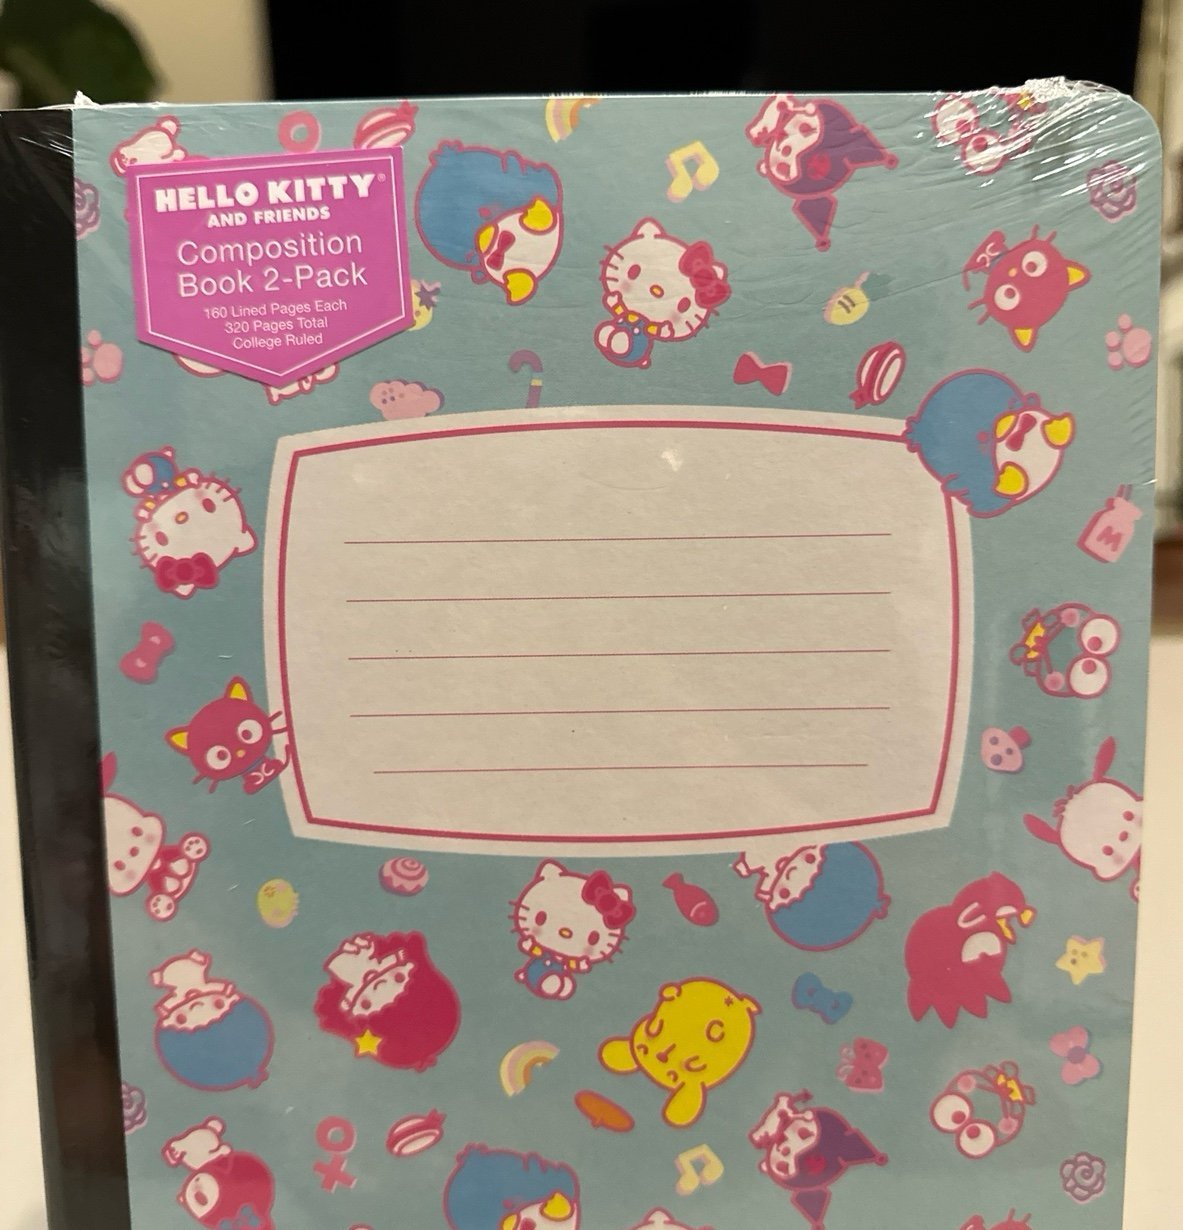 Hello Kitty and Friends Composition Book fvbWDpN6n